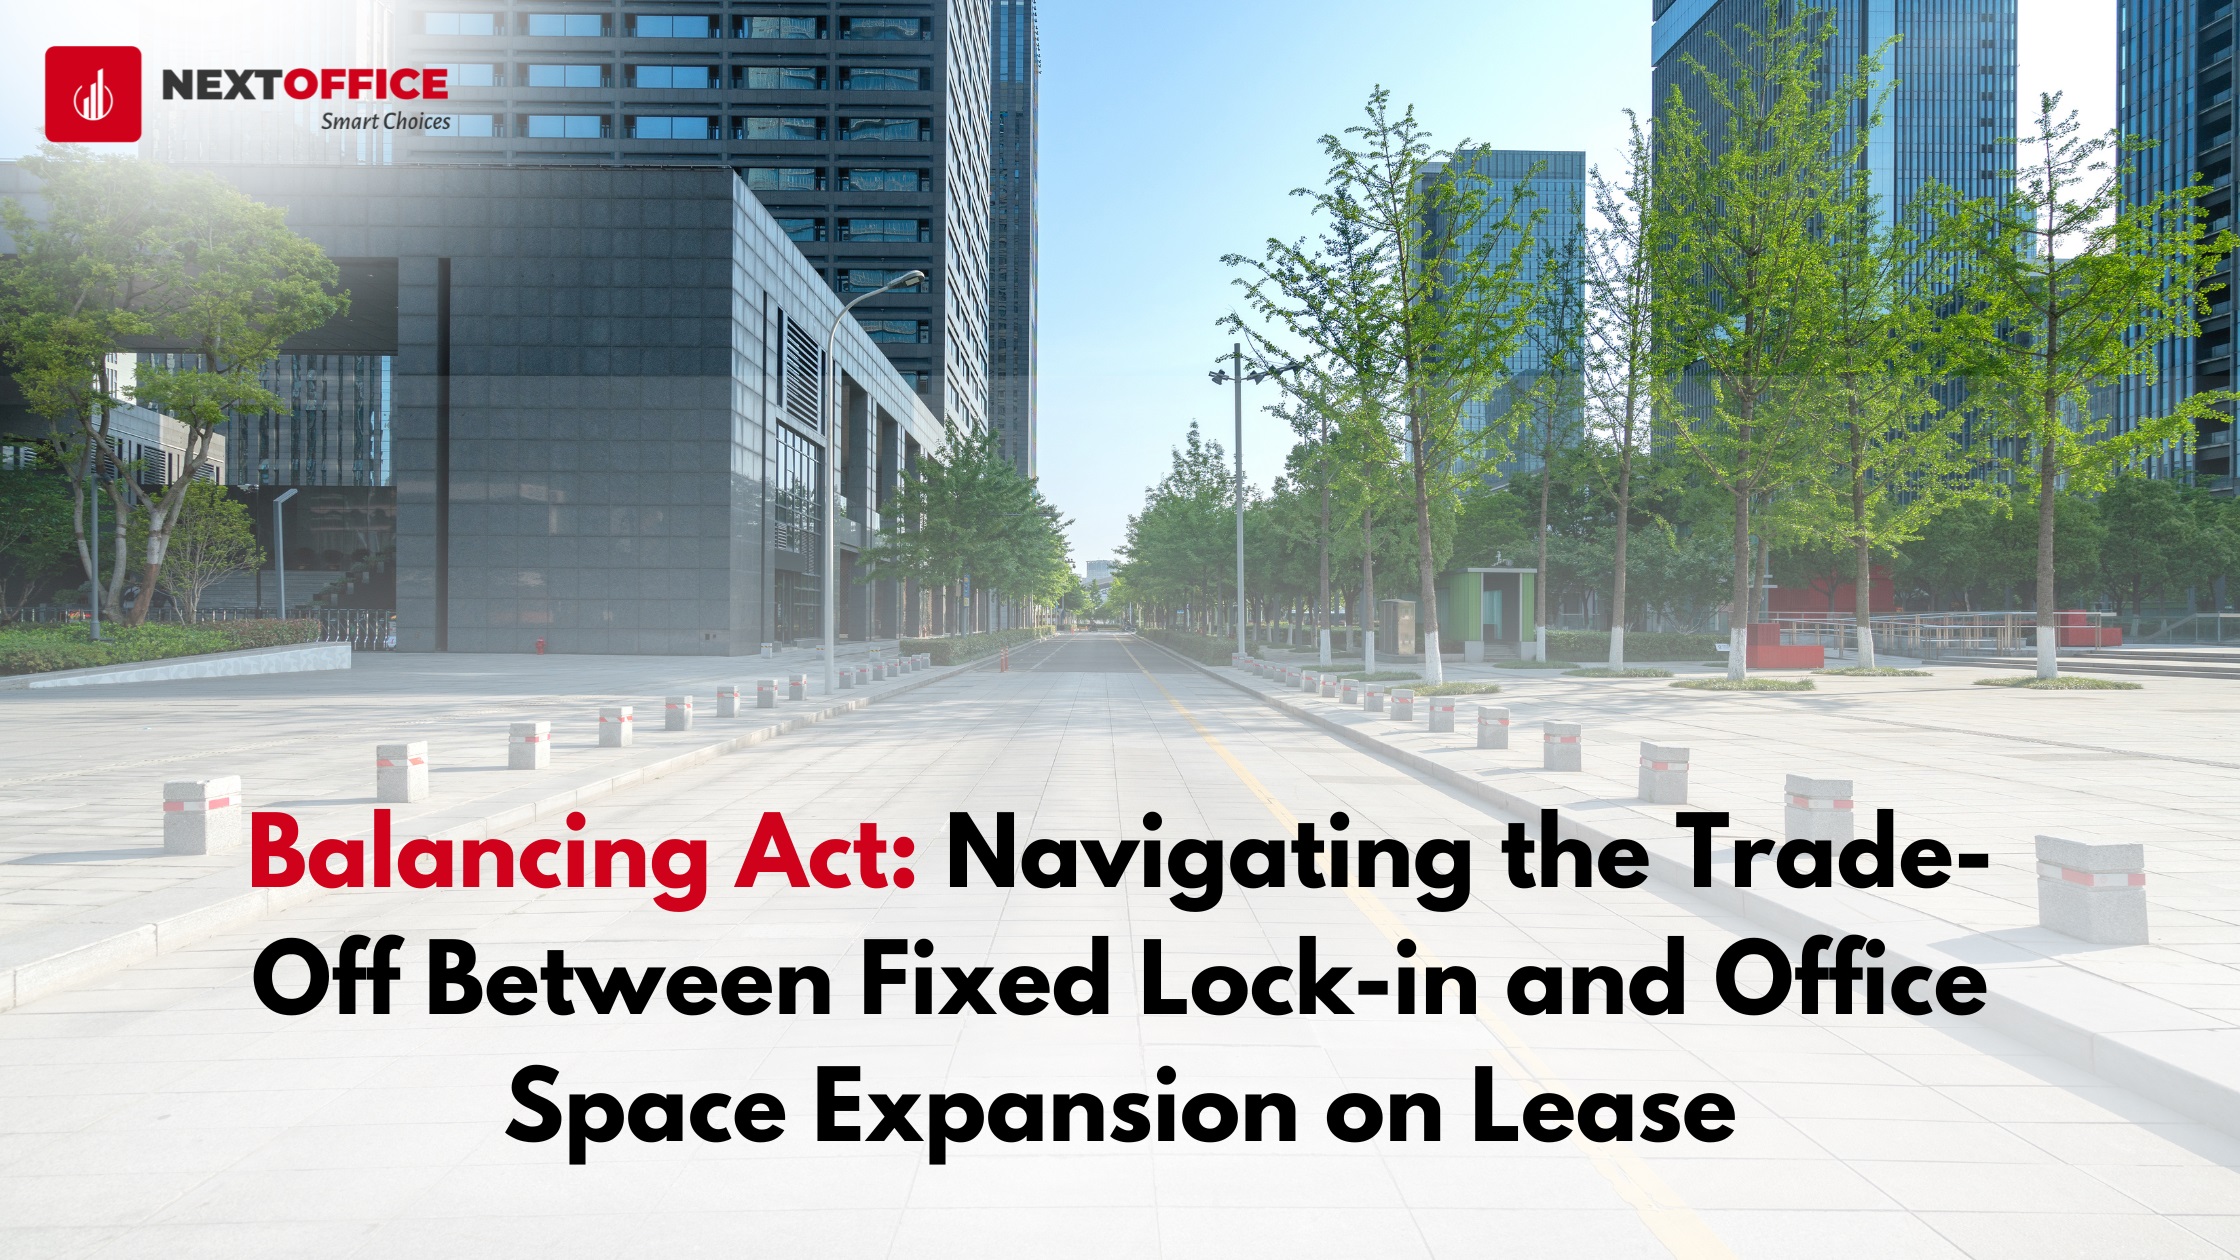 Balancing Act: Navigating the Trade-Off Between Fixed Lock-in and Office Space Expansion on Lease